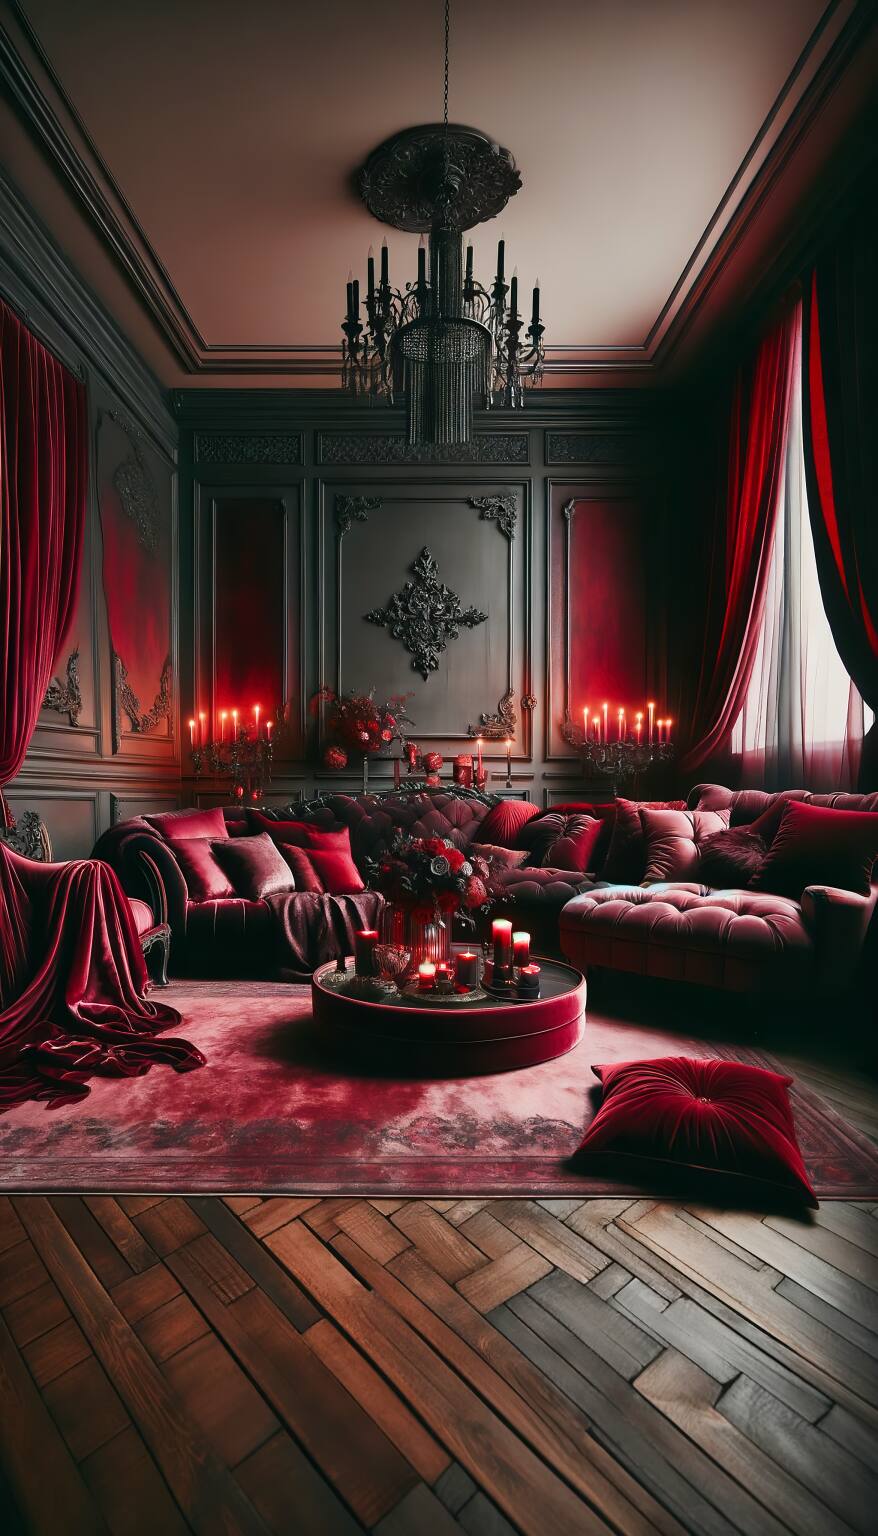 A Romantic Living Room In Crimson And Charcoal Hues, Featuring A Plush Velvet Sofa And Armchairs, Set In An Atmosphere Of Luxurious, Dreamlike Elegance.